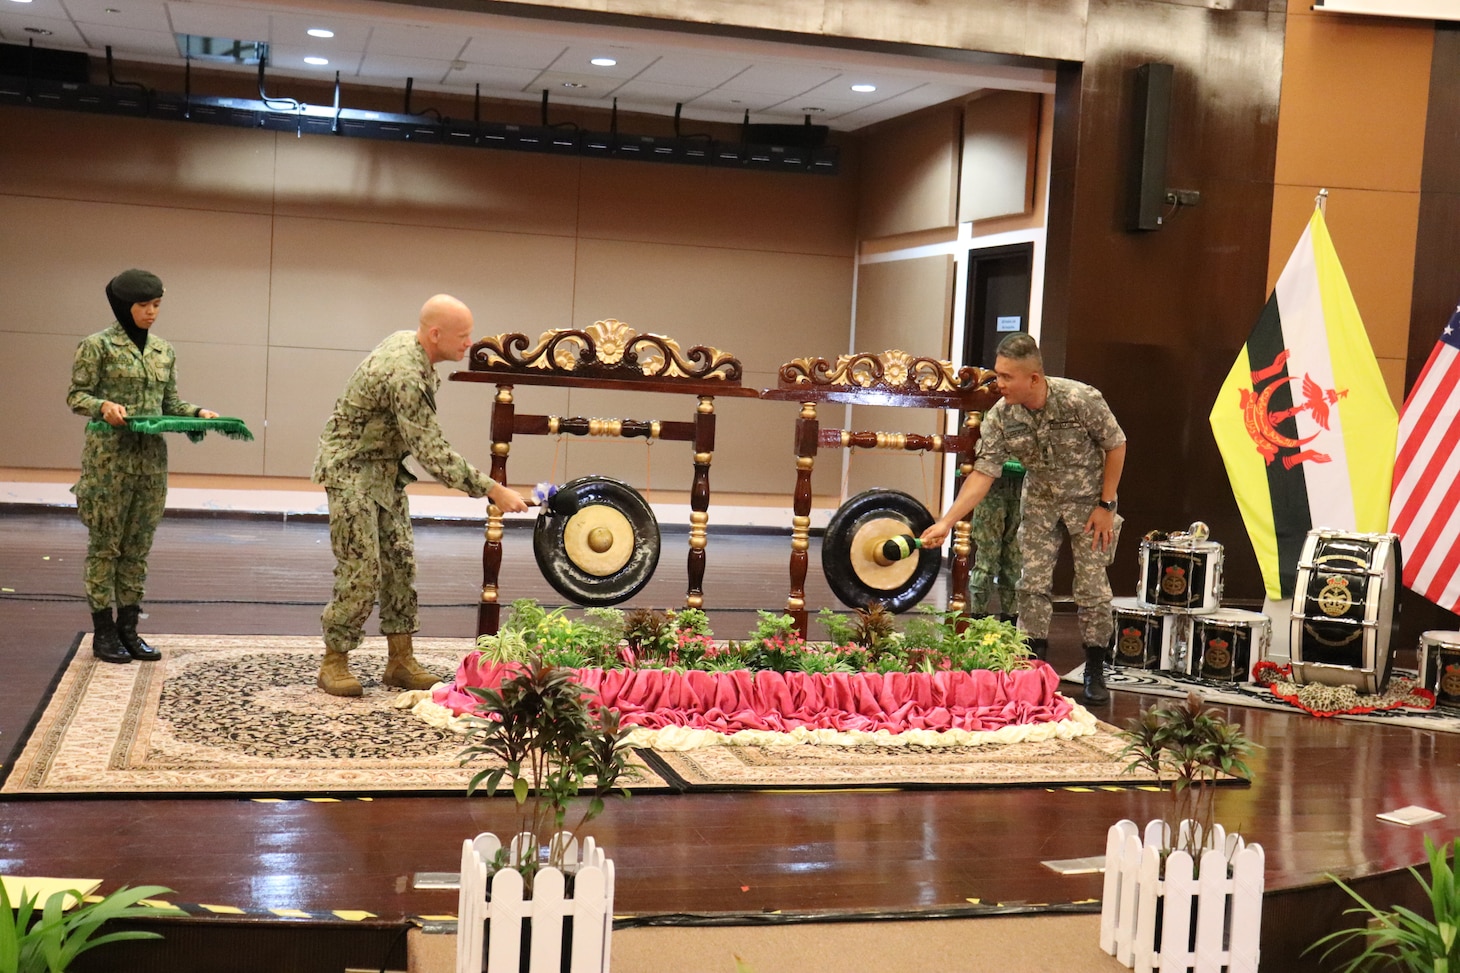 Capt. Matt Scarlett, deputy commodore of Commander Destroyer Squadron (DESRON) 7 rings the ceremonial gong with Royal Brunei Air Force Brig. Gen. Dato Seri Phlawan Alirupendi, joint force commander, during the opening ceremony of Cooperation Afloat Readiness and Training (CARAT) Brunei 2023 in Bandar Seri Begawan, Sept. 12.